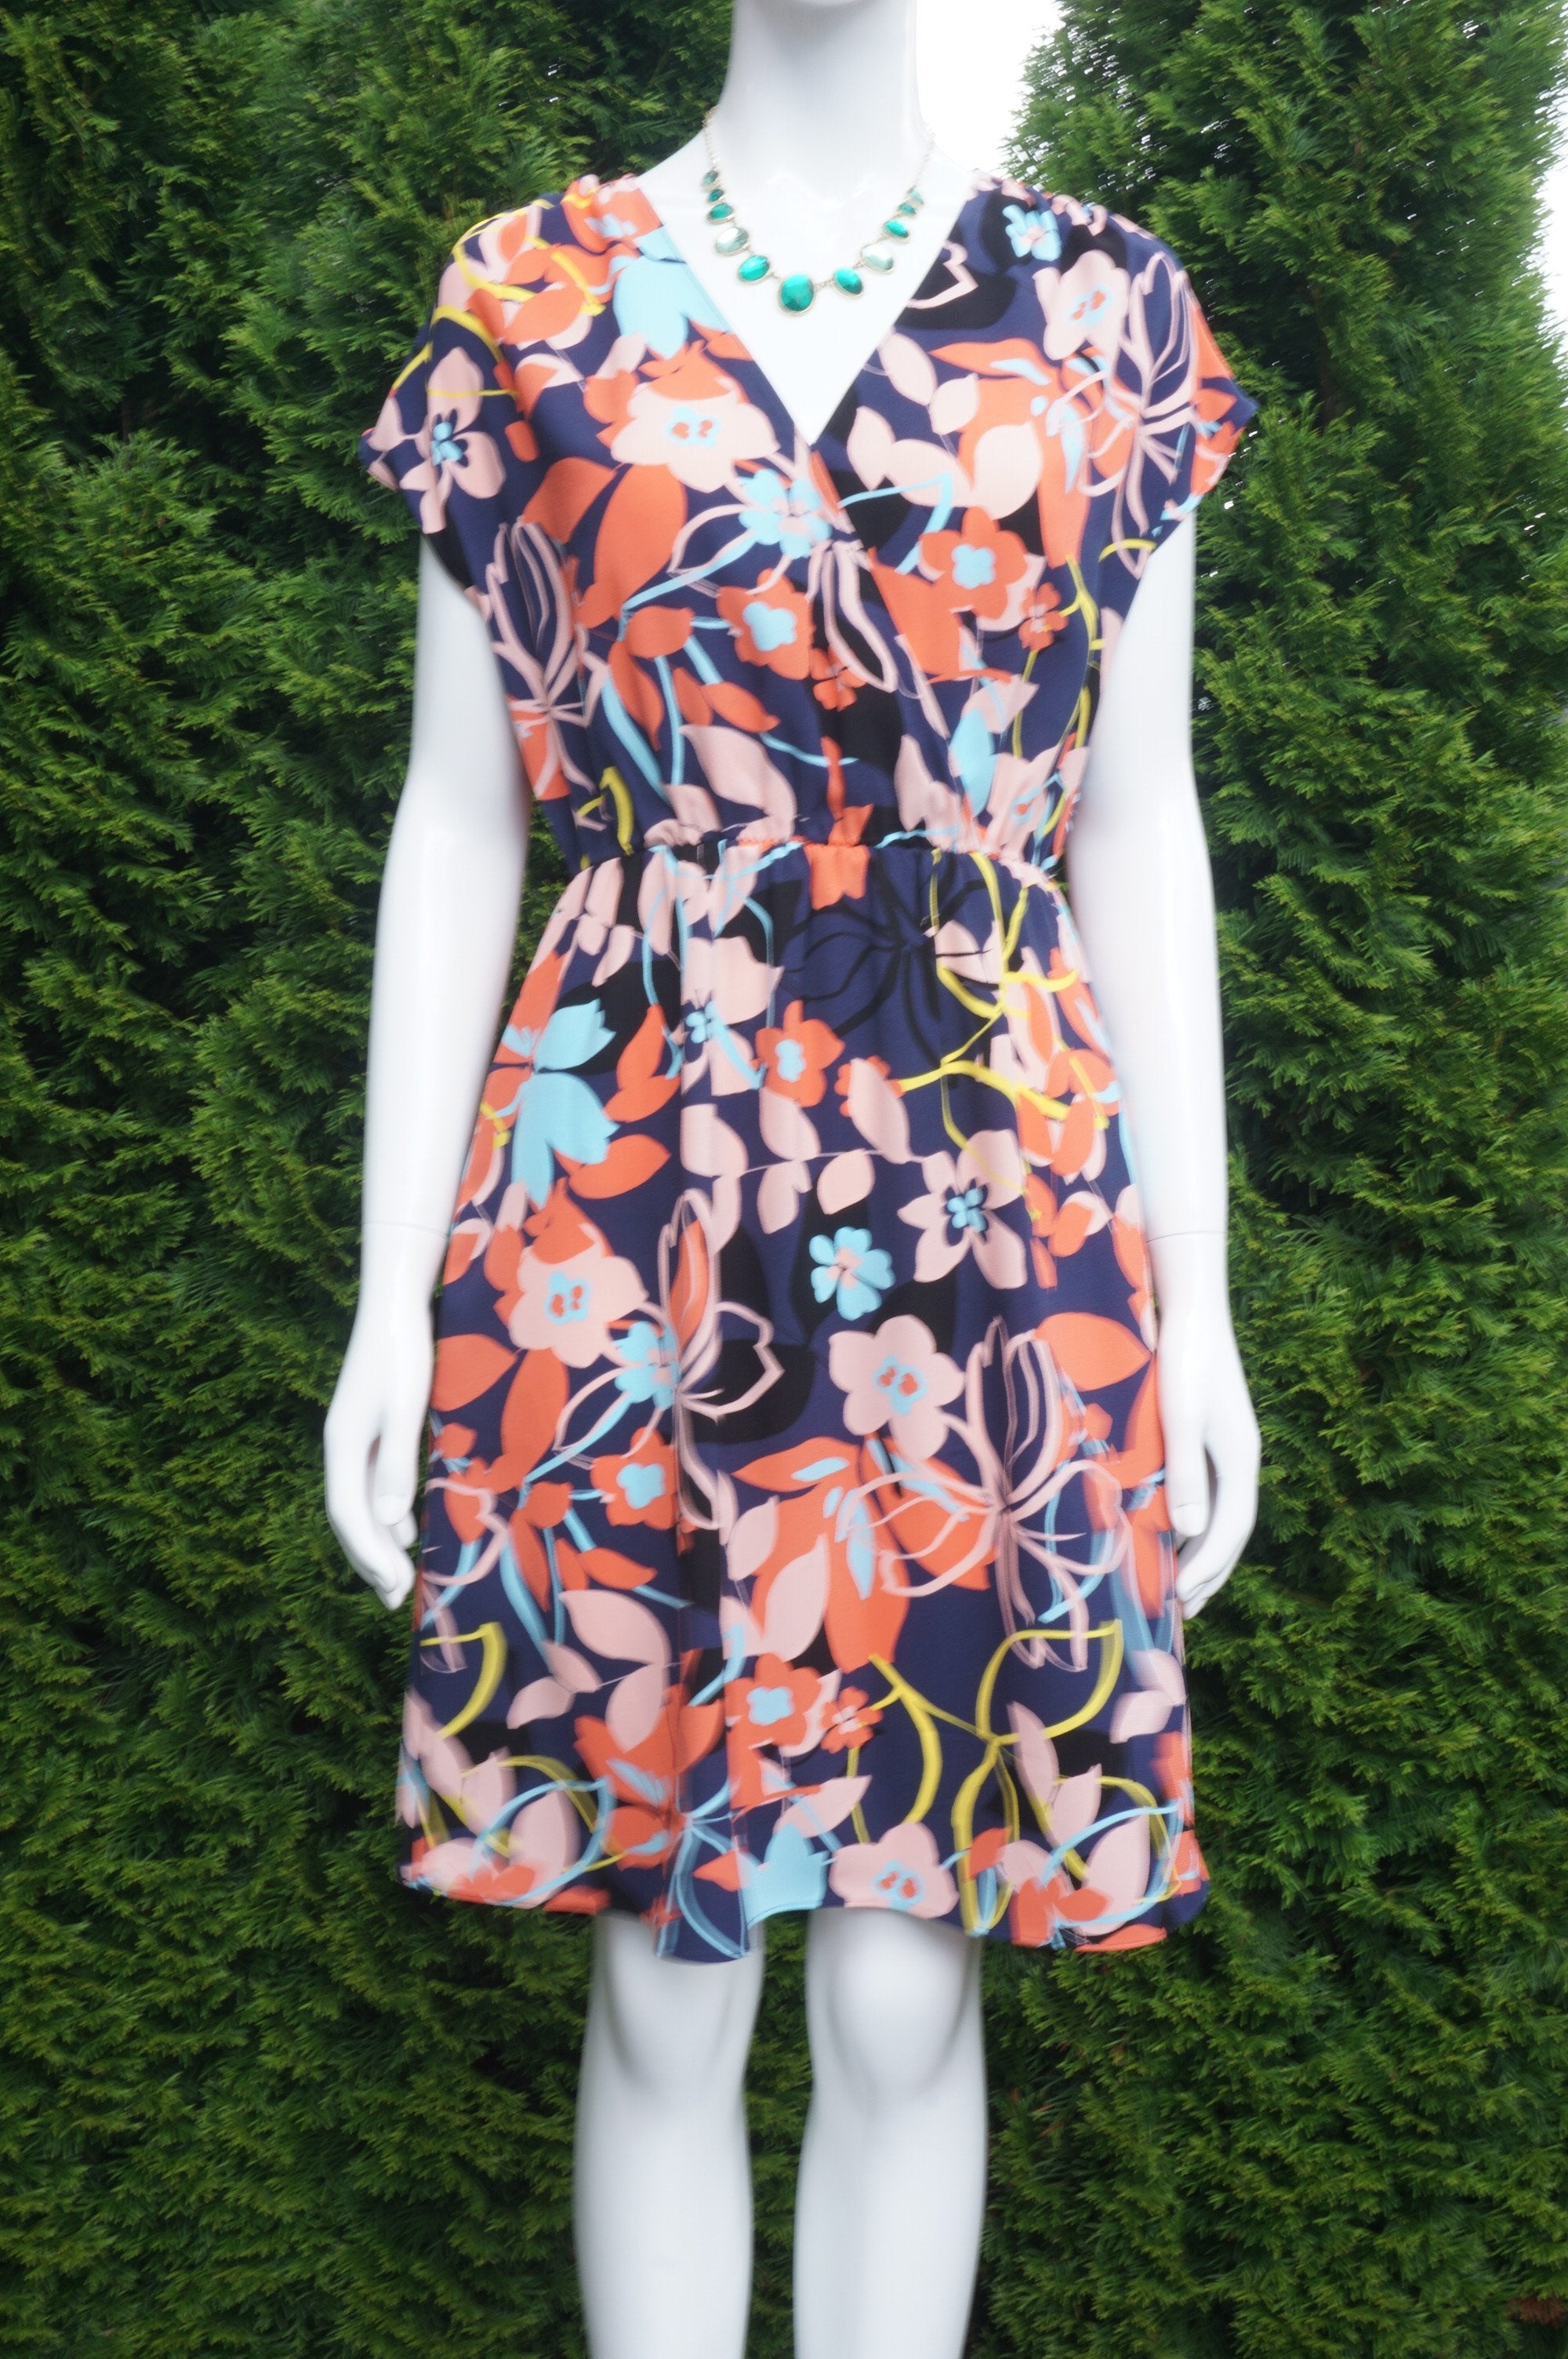 Halogen Floral Summer Dress with Elastic Waistband, Measurements: Bust 38 inches, waist 27 inches (when elastic is relaxed) Length 37 inches. Relaxed fit. Like new condition., Pink, Blue, 100% Polyester, women's Dresses & Rompers, women's Pink, Blue Dresses & Rompers, Halogen women's Dresses & Rompers, floral summer dress, loose fitting dress, cute summer dress